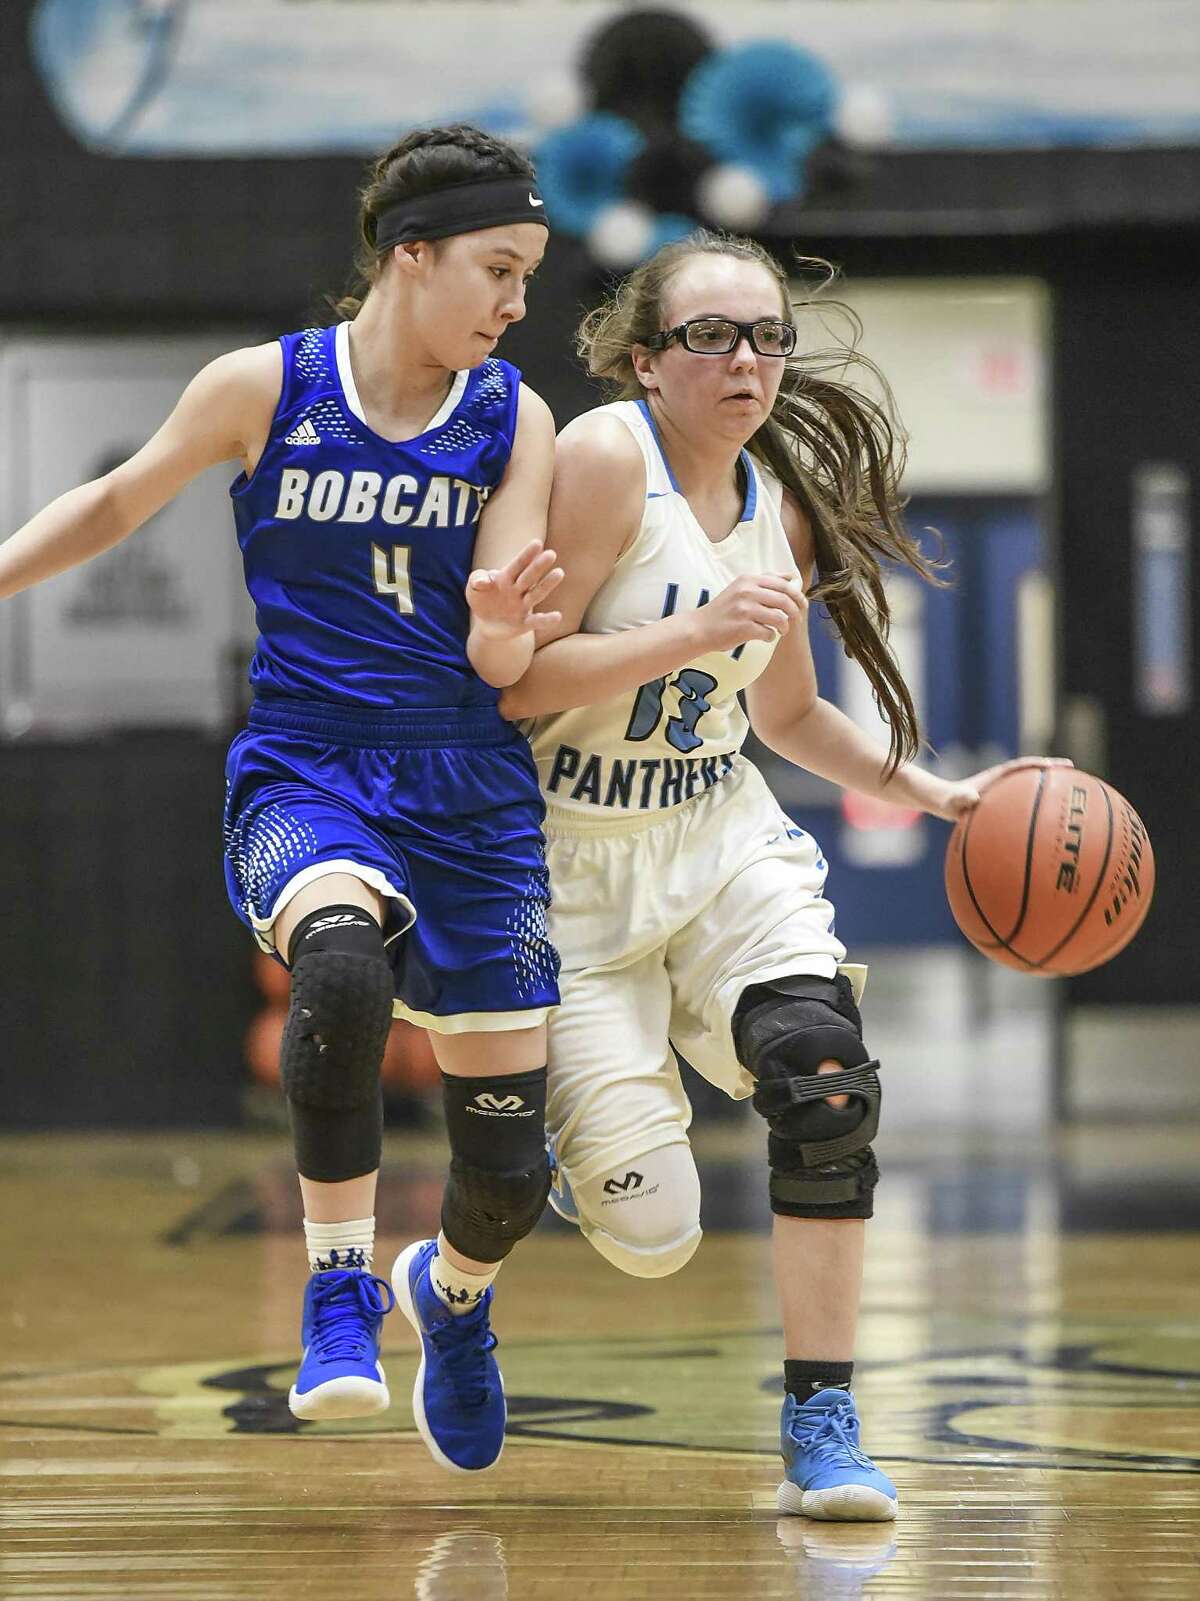 South San’s Rhiannon Gamez (left), a senior guard, bumps United South’s Stef Galindo as Galindo tries to move the ball down the court Tuesday, Dec. 12. Bobcats lost the hard-fought game, 69-65.